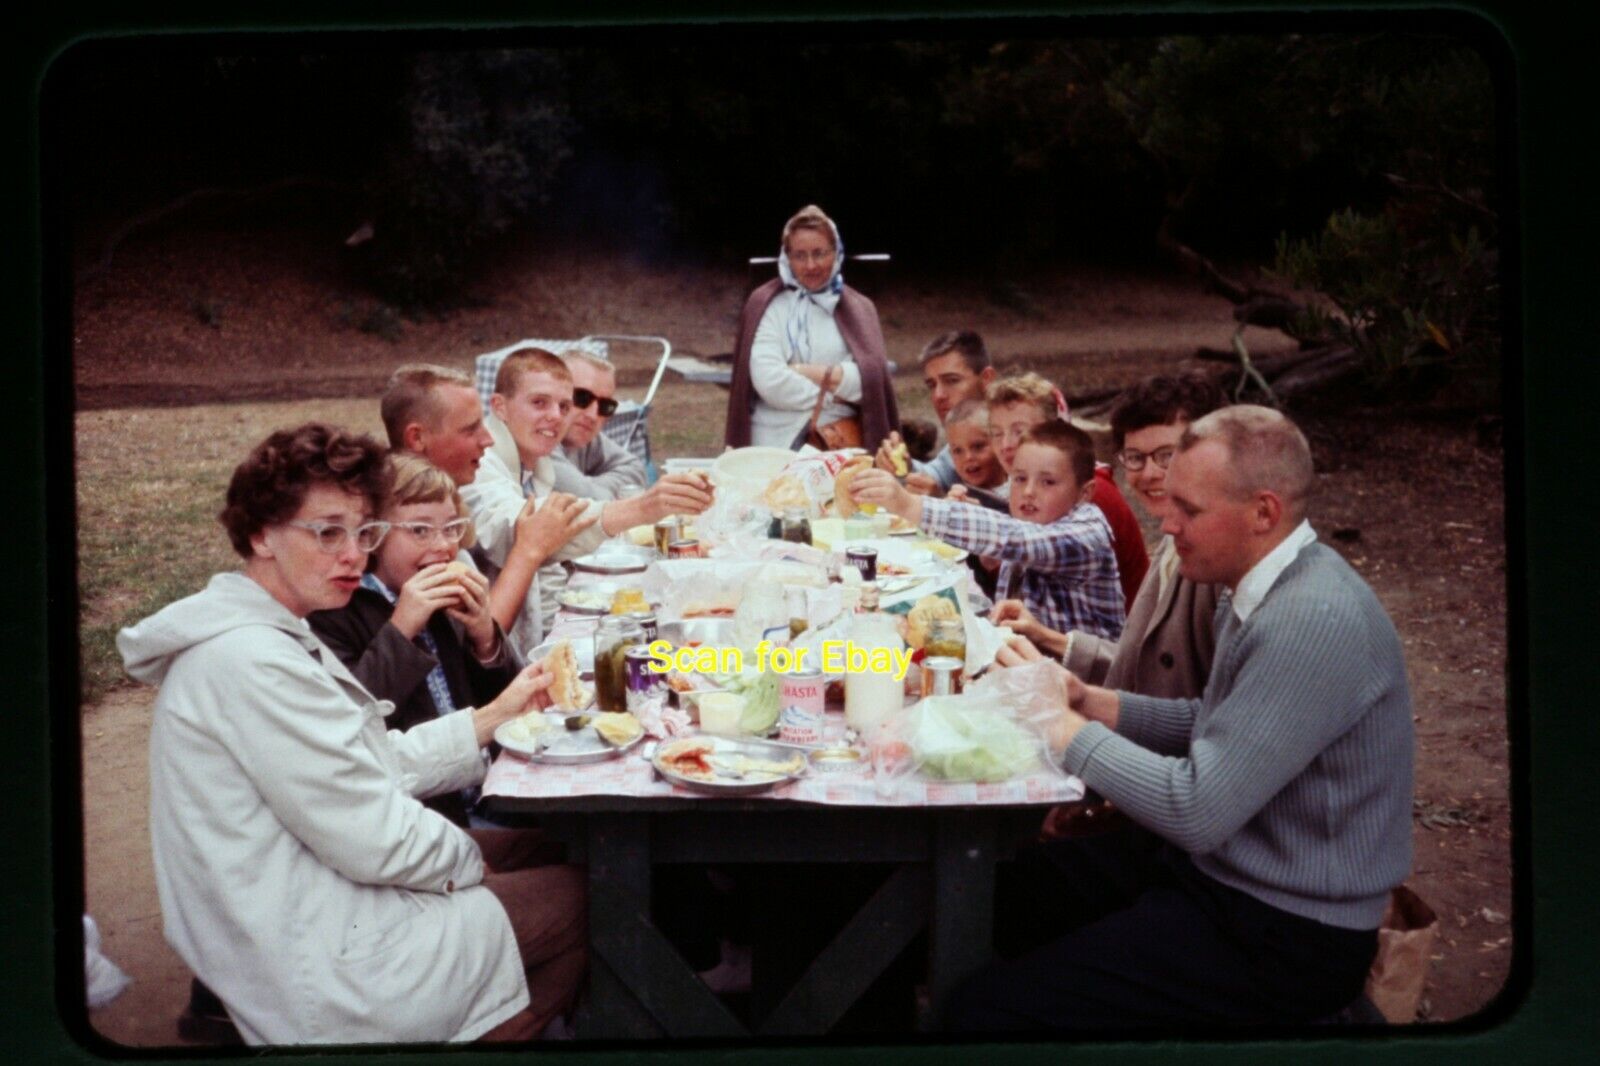 People having Picnic with Shasta Soda Cans in 1961, Slide aa 2-1b